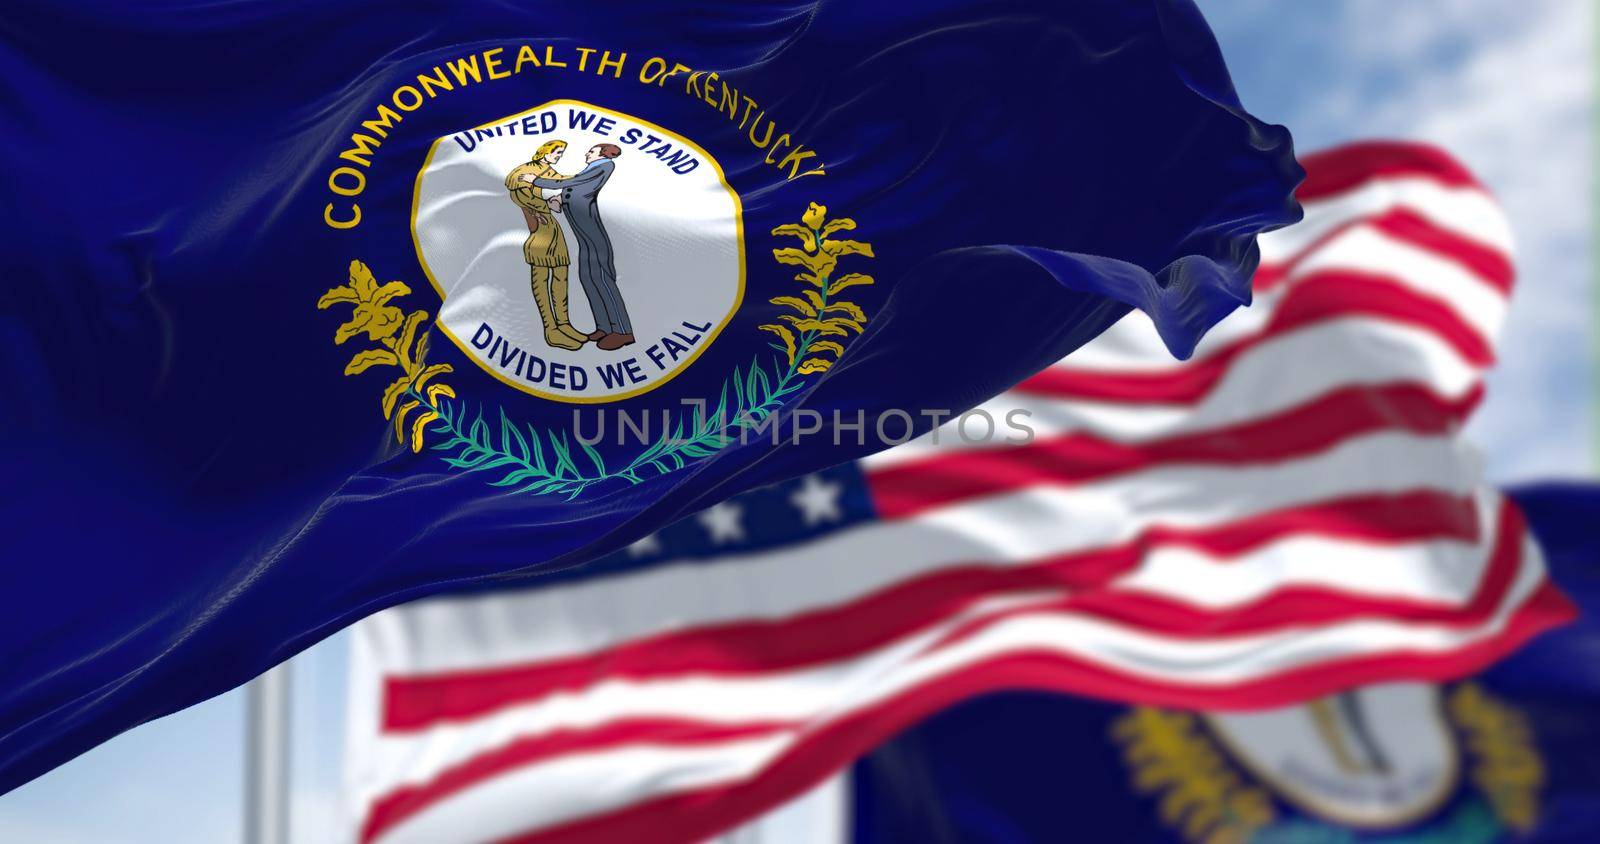 The Kentucky state flag waving along with the national flag of the United States of America by rarrarorro